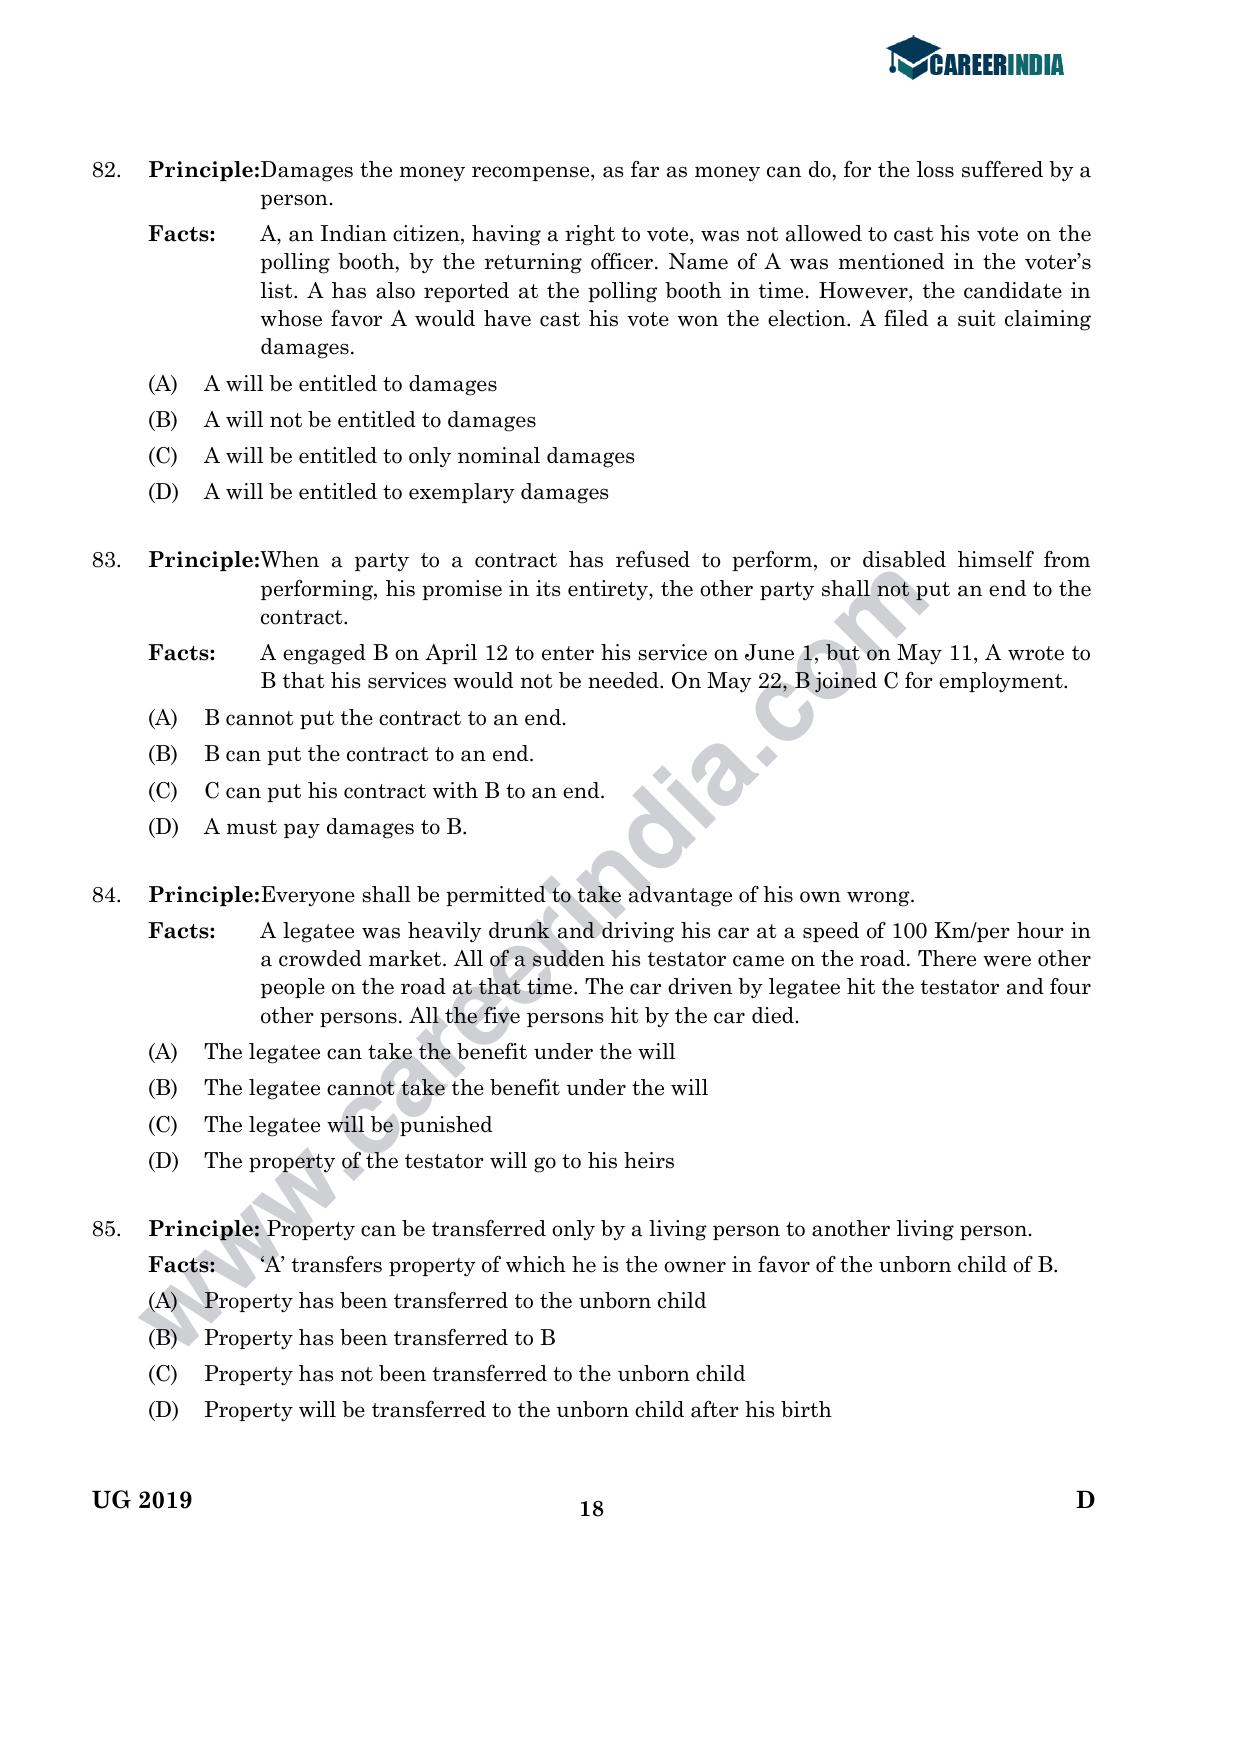 CLAT 2019 UG Logical-Reasoning Question Paper - Page 17